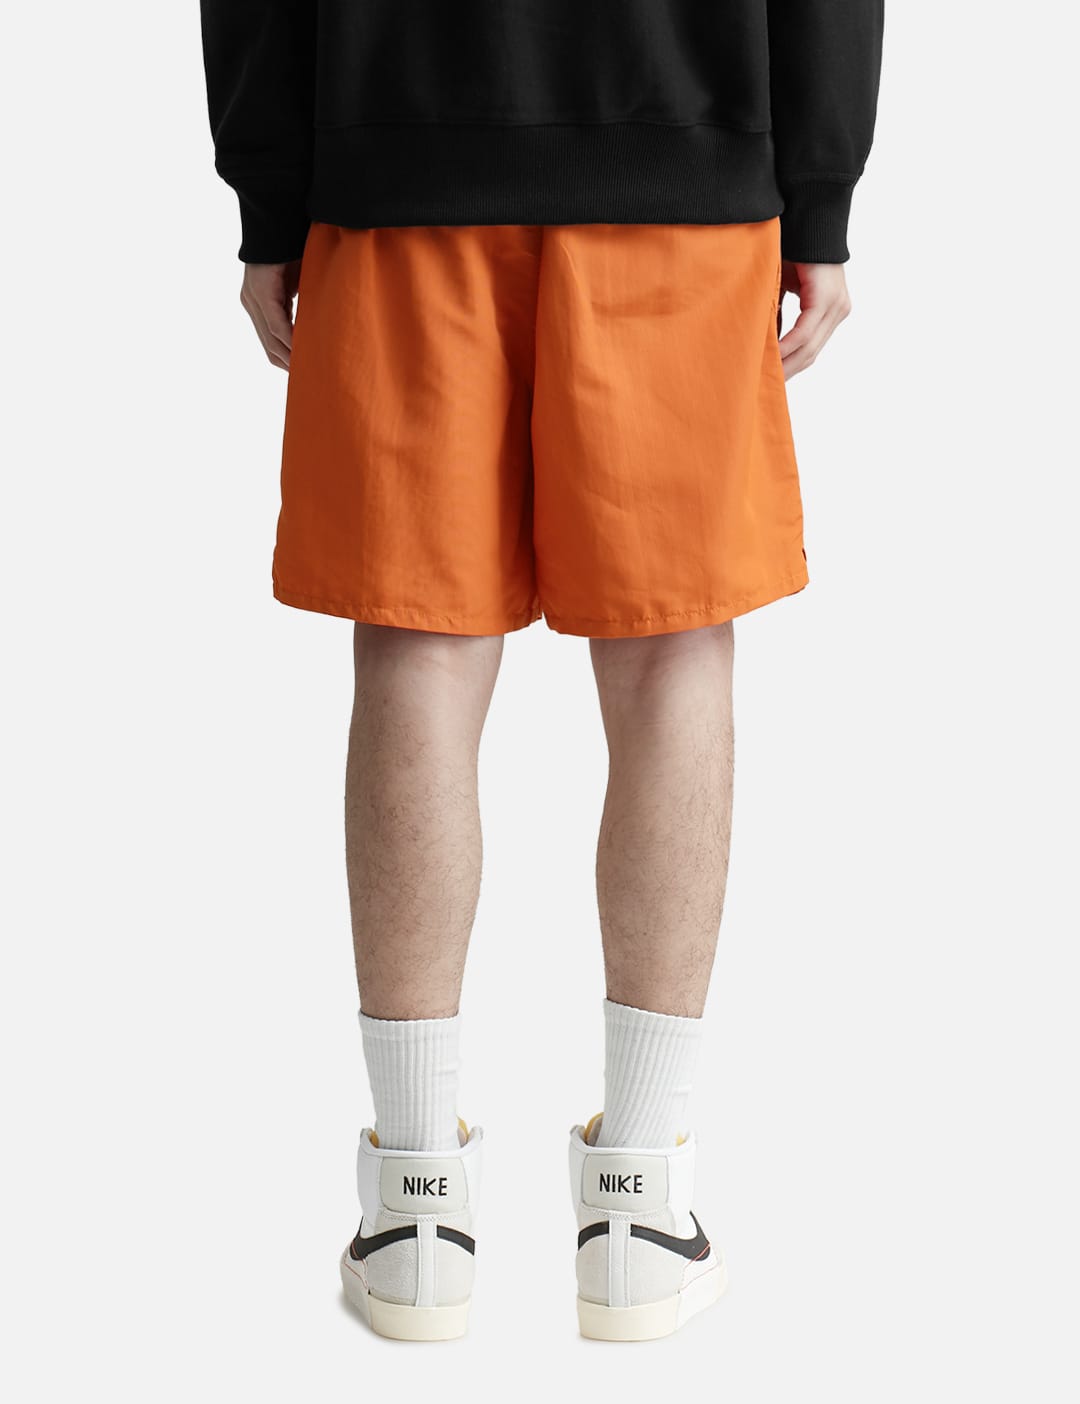 Stüssy   Stock Water Shorts   HBX   Globally Curated Fashion and